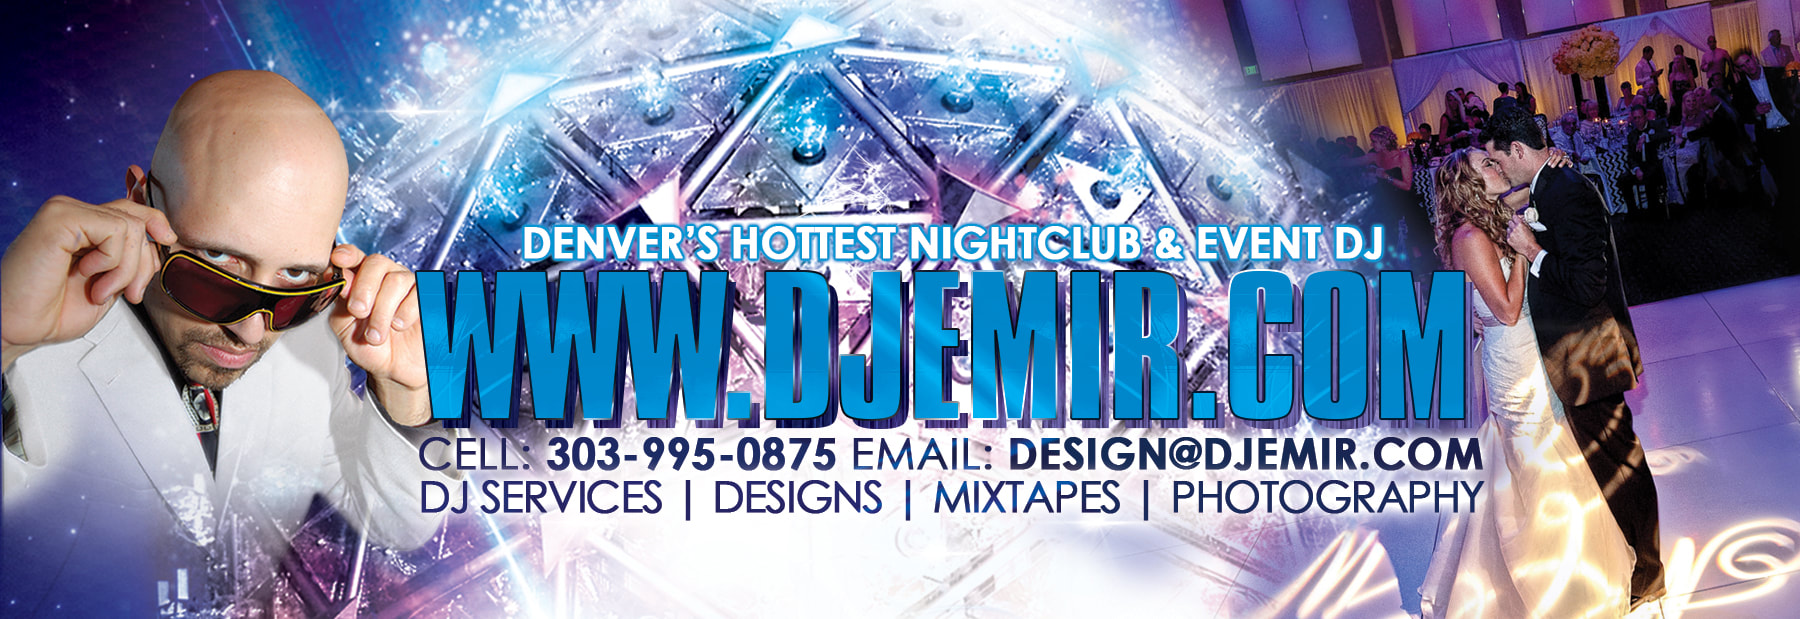 DJ Emir Winter New Year's Eve, Weddings and Christmas Party DJ Service Advertising Banner Design Long Flyer